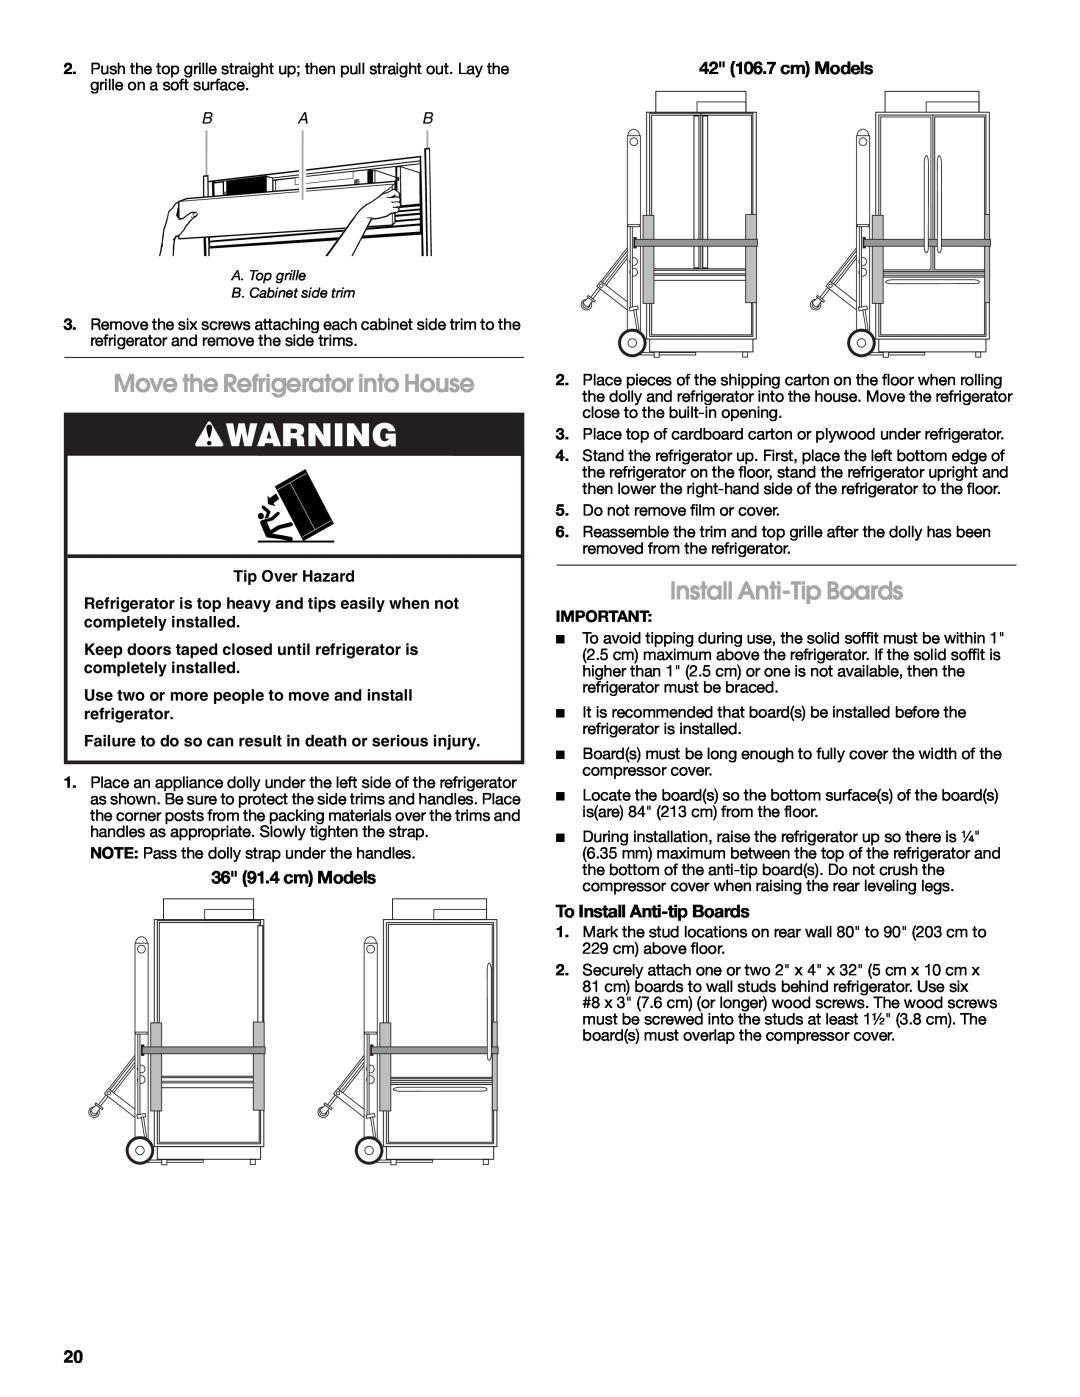 Jenn-Air W10183782A manual Move the Refrigerator into House, Install Anti-Tip Boards, To Install Anti-tip Boards 